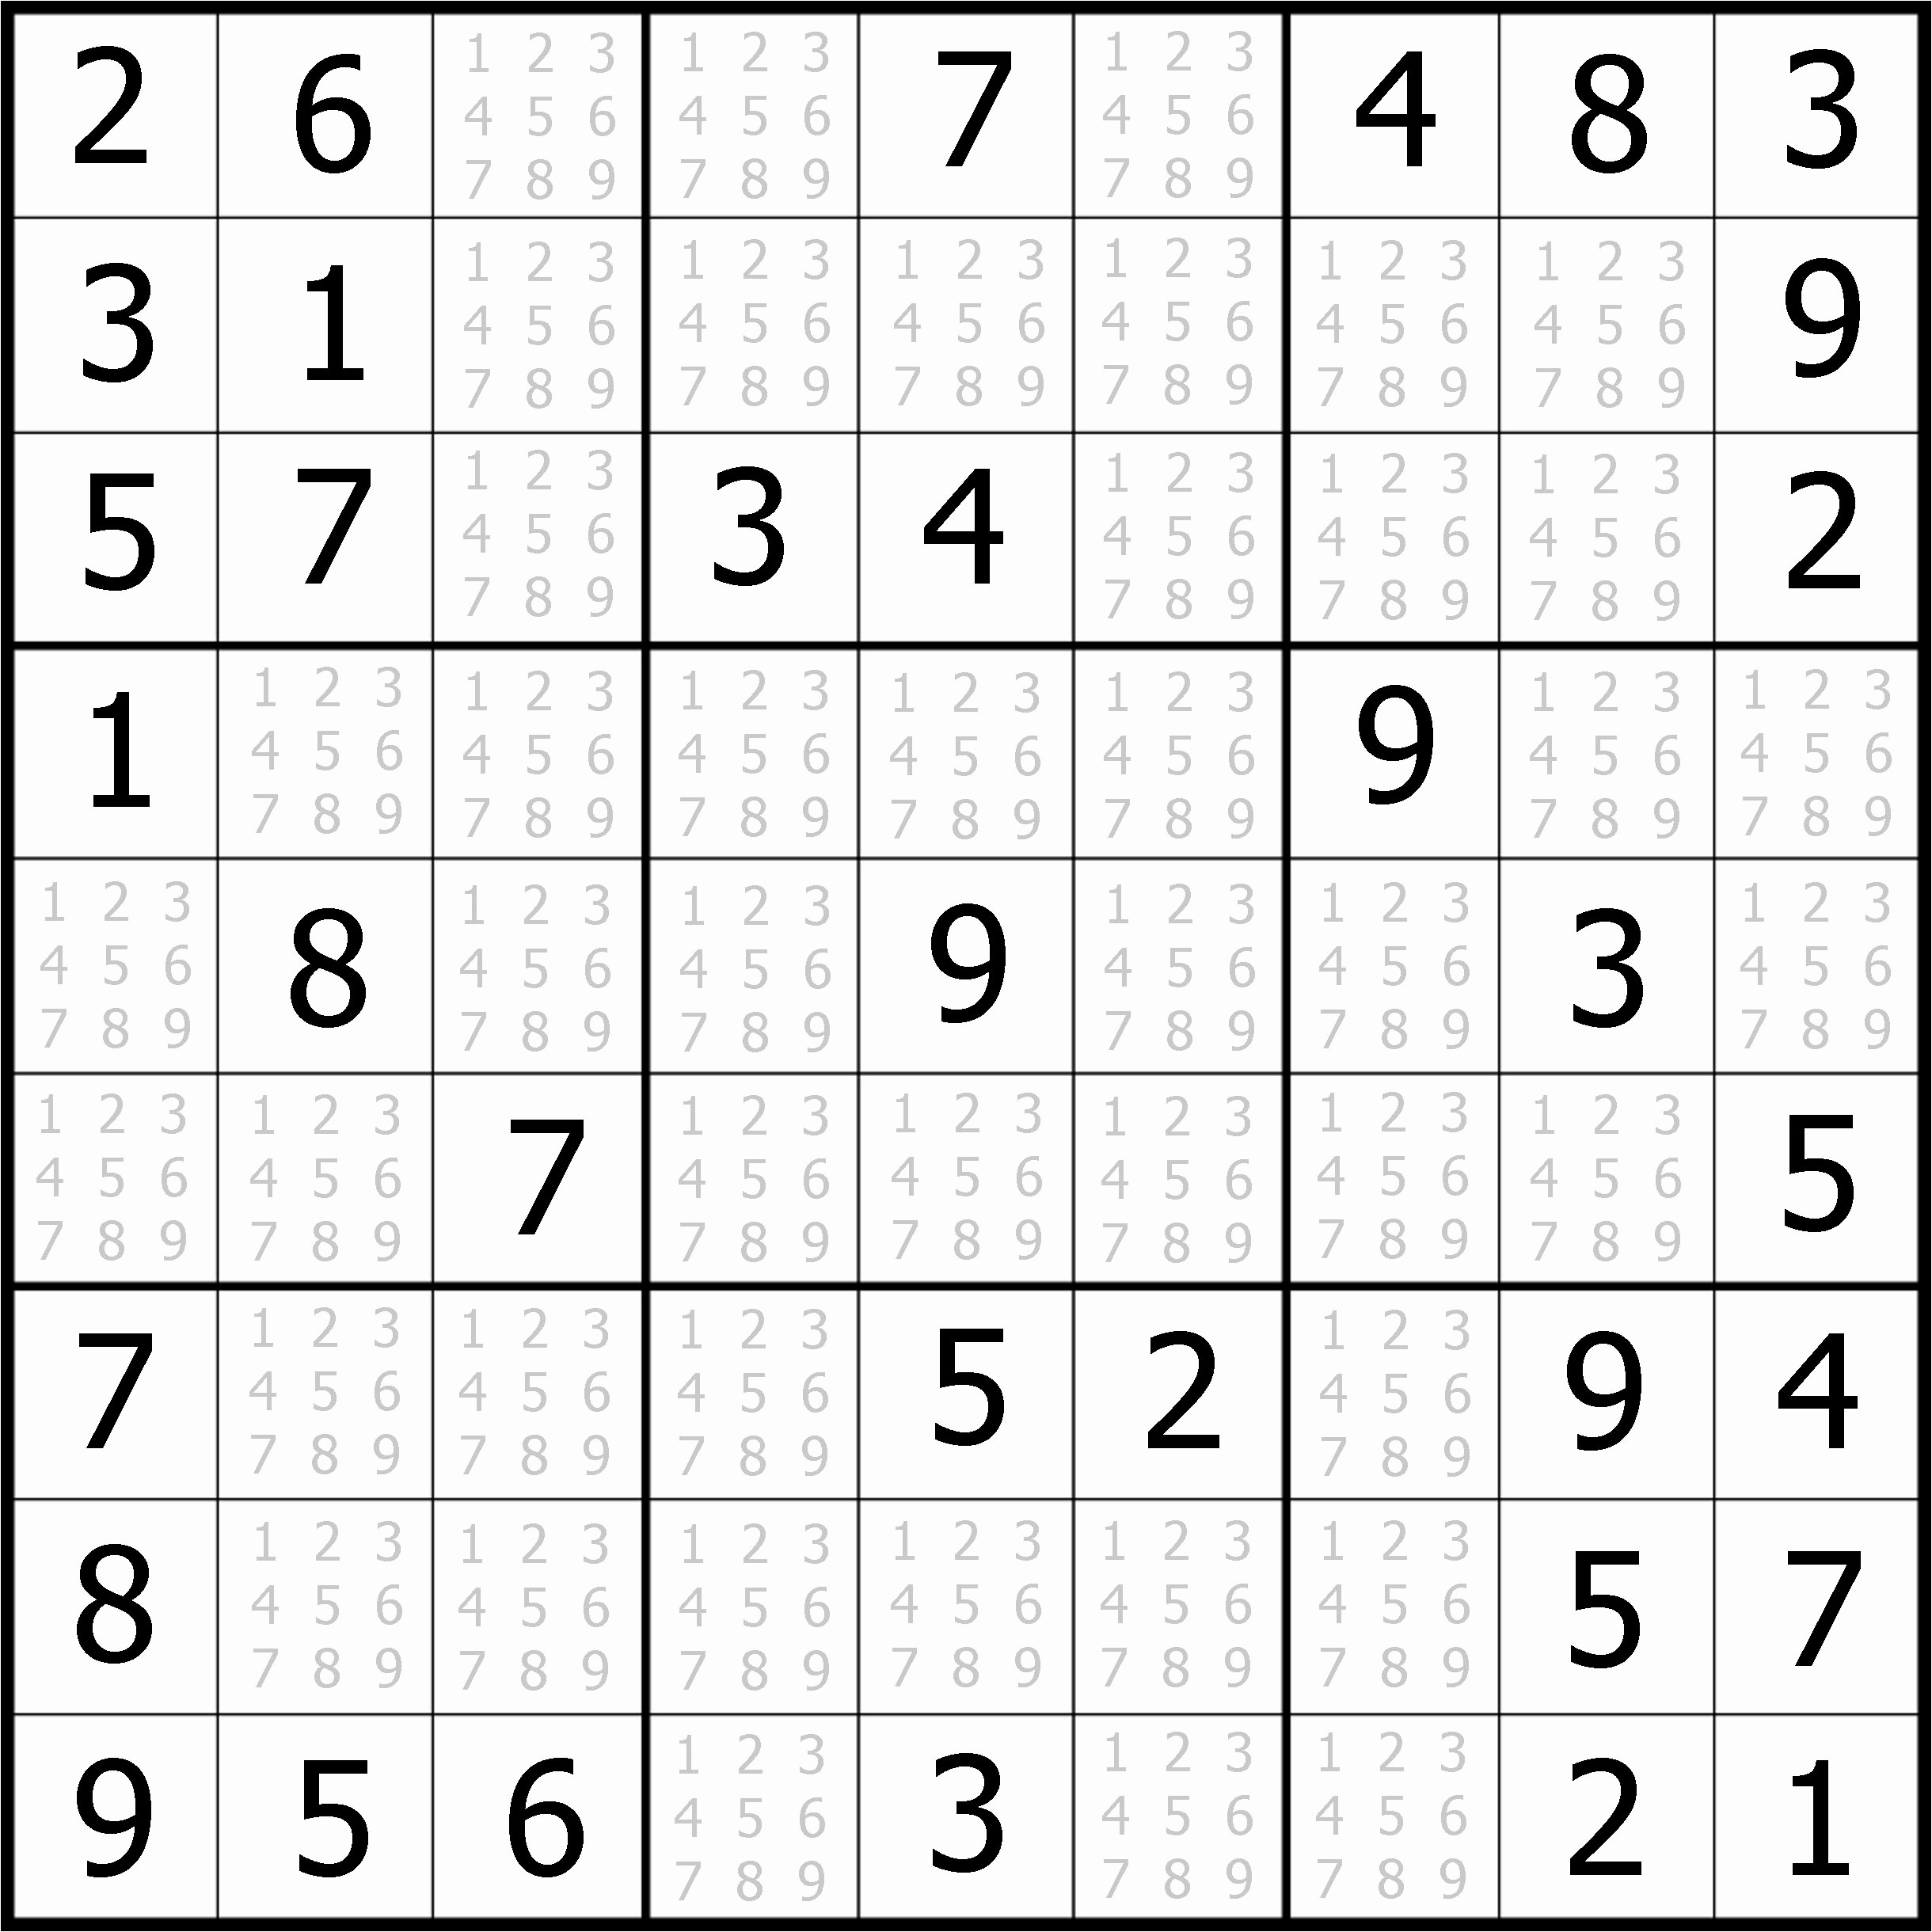 Easy Sudoku Puzzles To Print Free Download Featured Sudoku Puzzle To - Free Printable Sudoku Puzzles